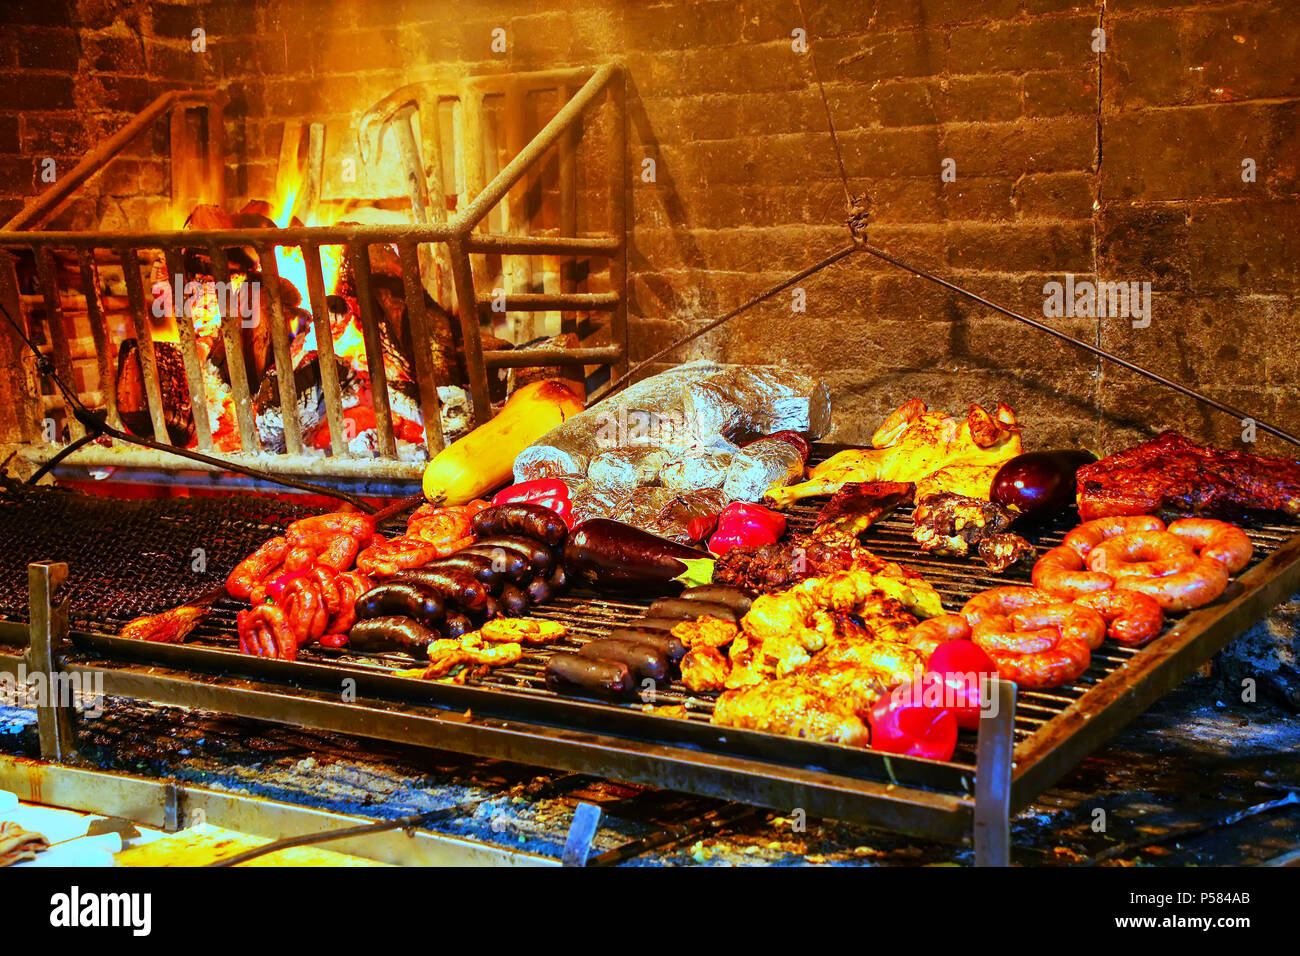 Display of meats in Port Market, Montevideo, Uruguay. It is the most popular place for parillas (barbeque) in the city. Stock Photo